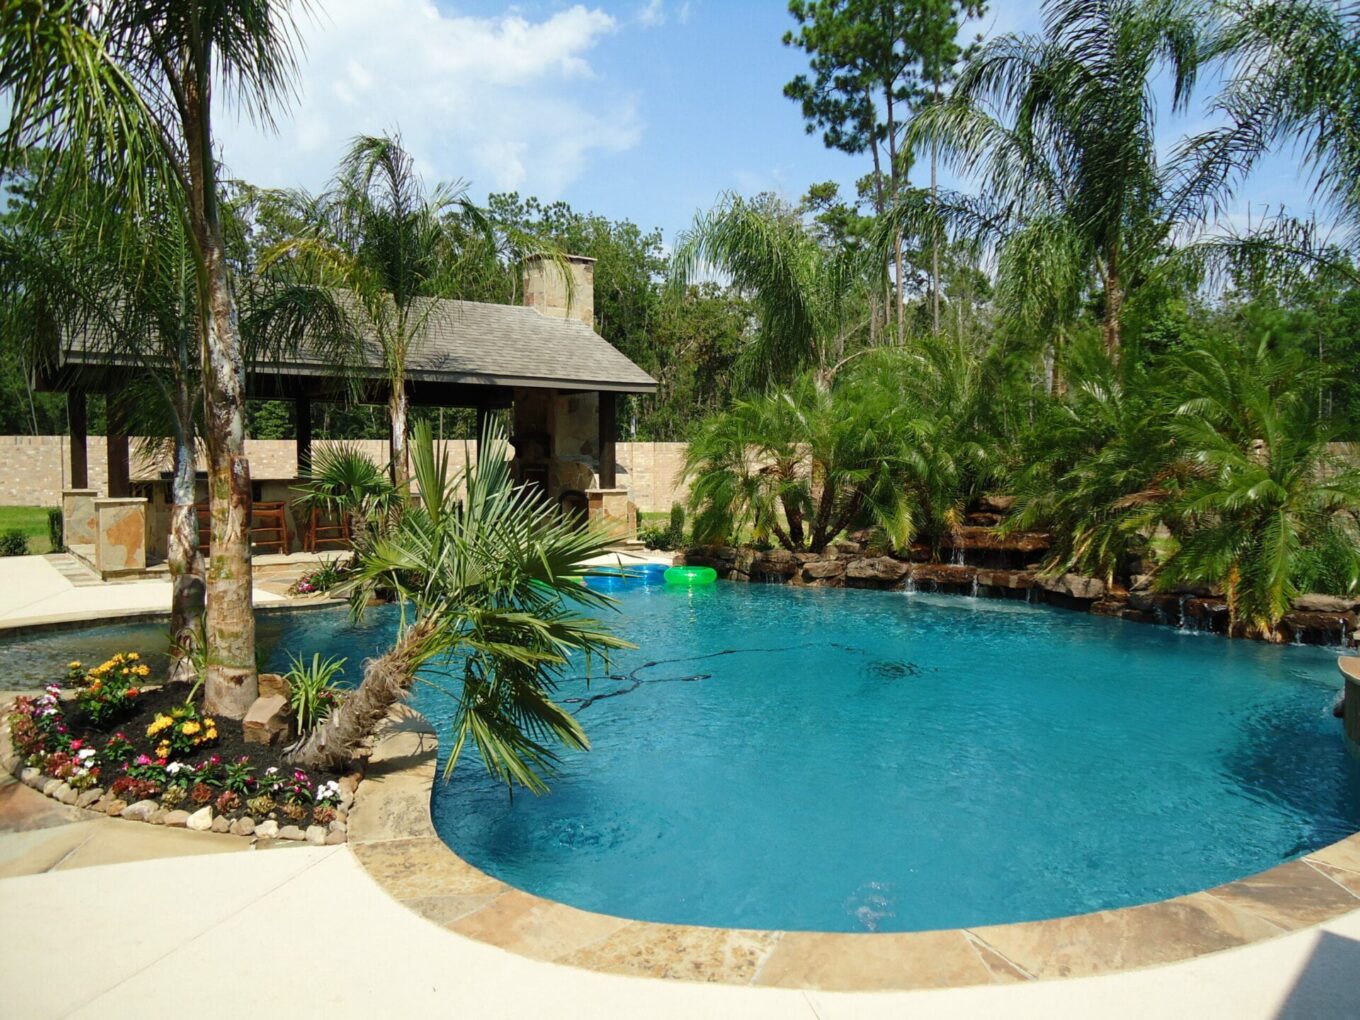 A pool with palm trees and a house in the background.